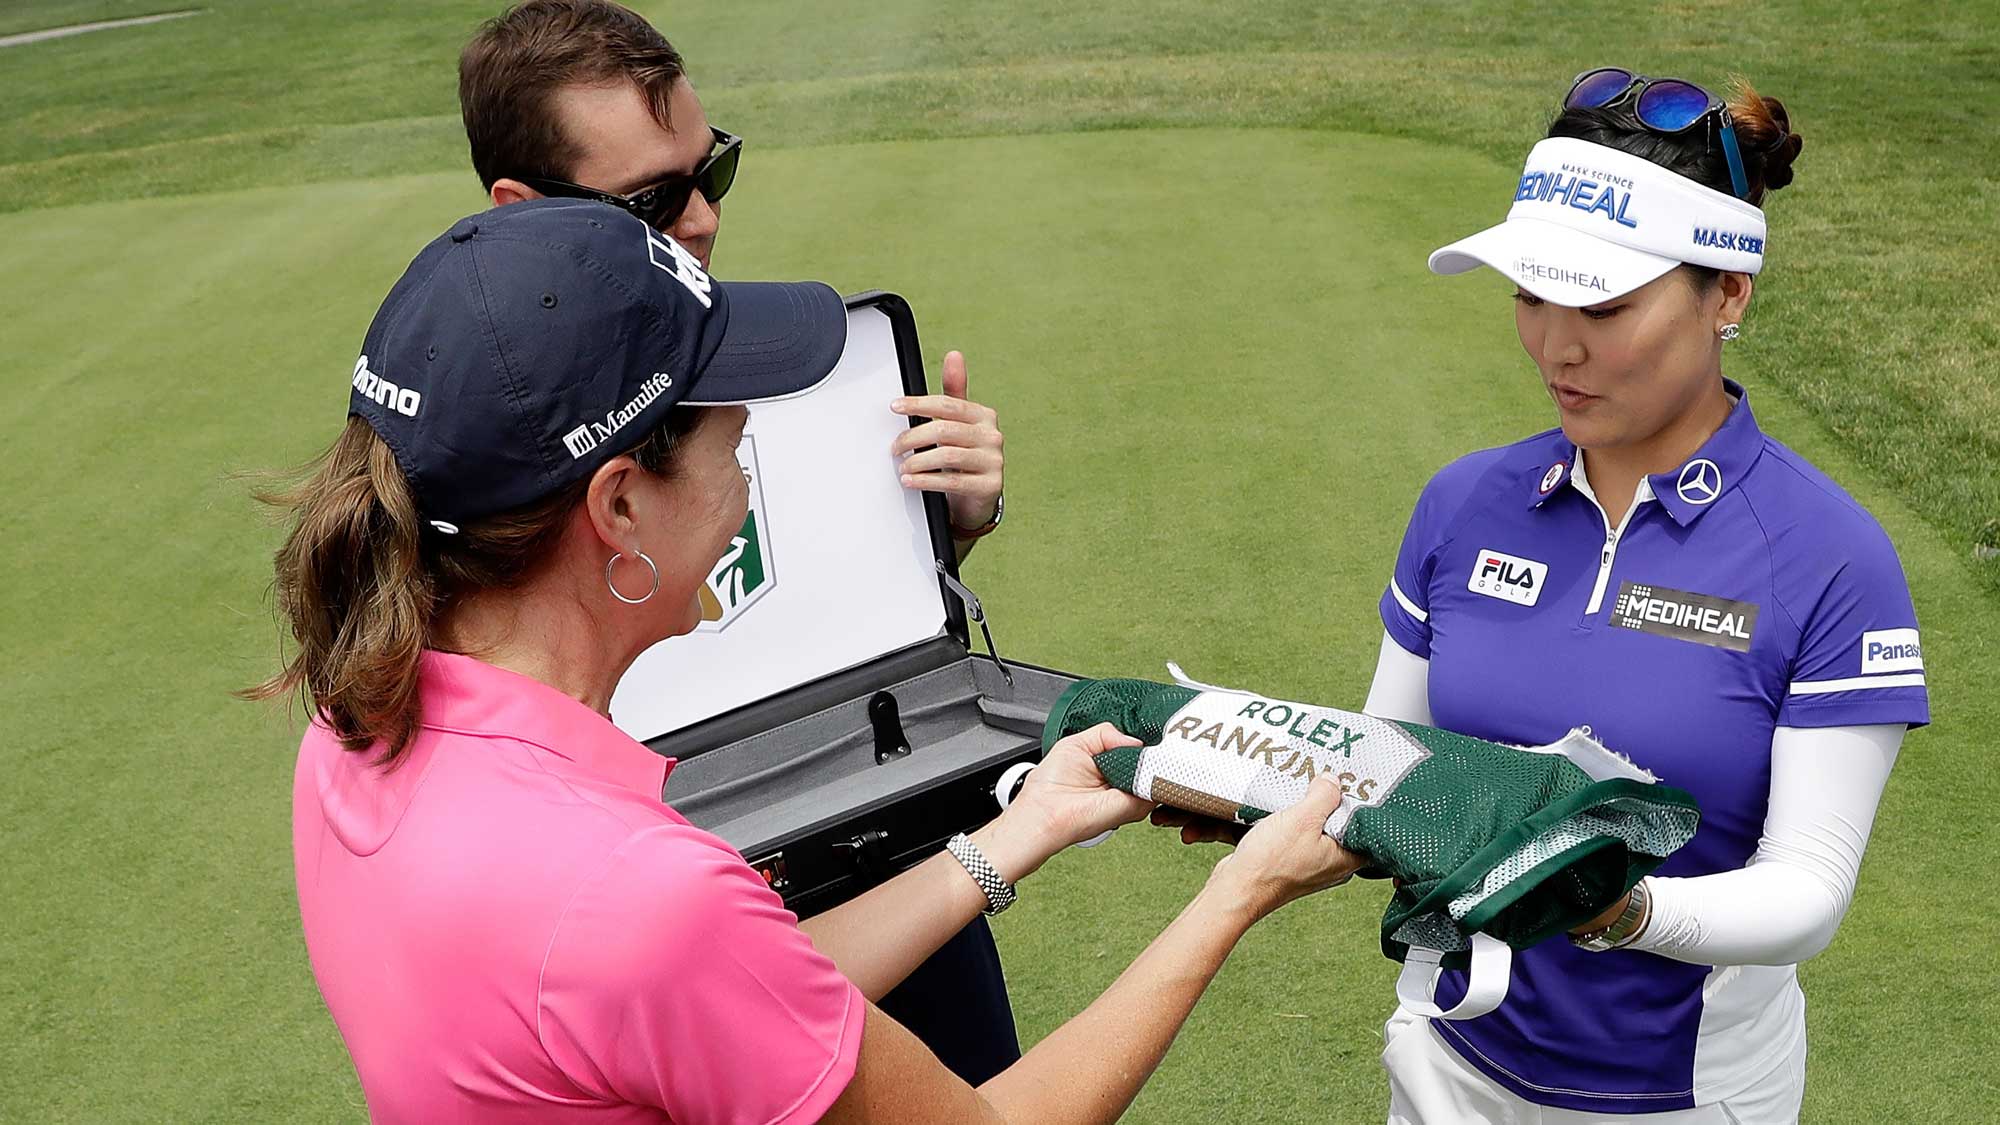 Lynne Doughtie Chairman and CEO of KPMG U.S. presents So Yeon Ryu of South Korea a caddie bib signifying her #1 world ranking during the first round of the 2017 KPMG PGA Championship